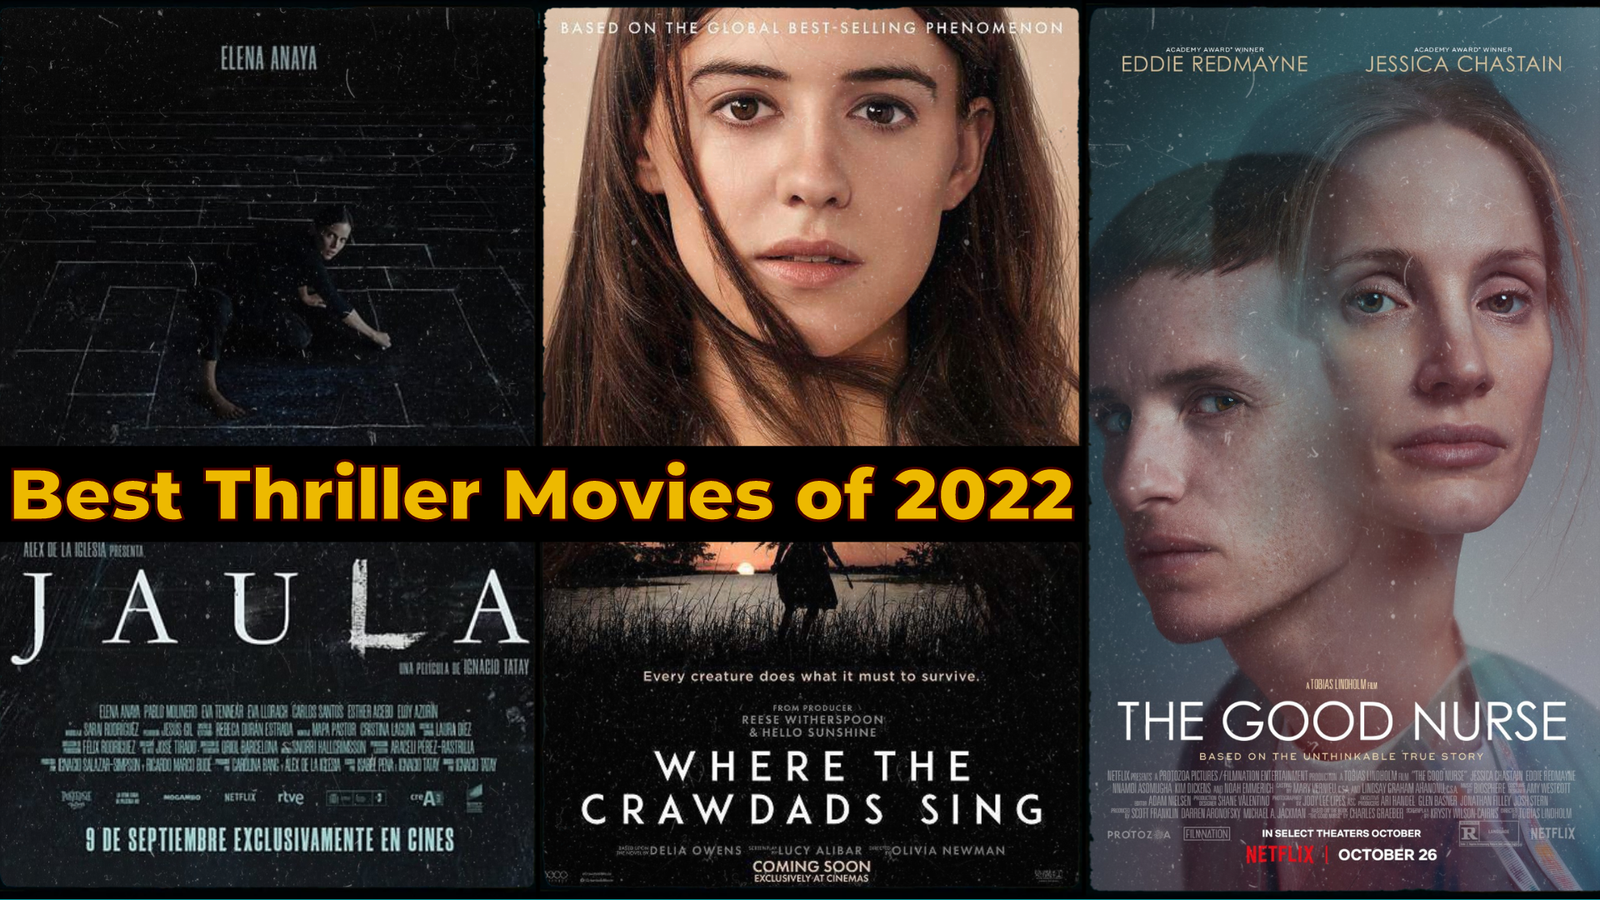 What Were the Best Movies of 2022? - Thriller Edition!